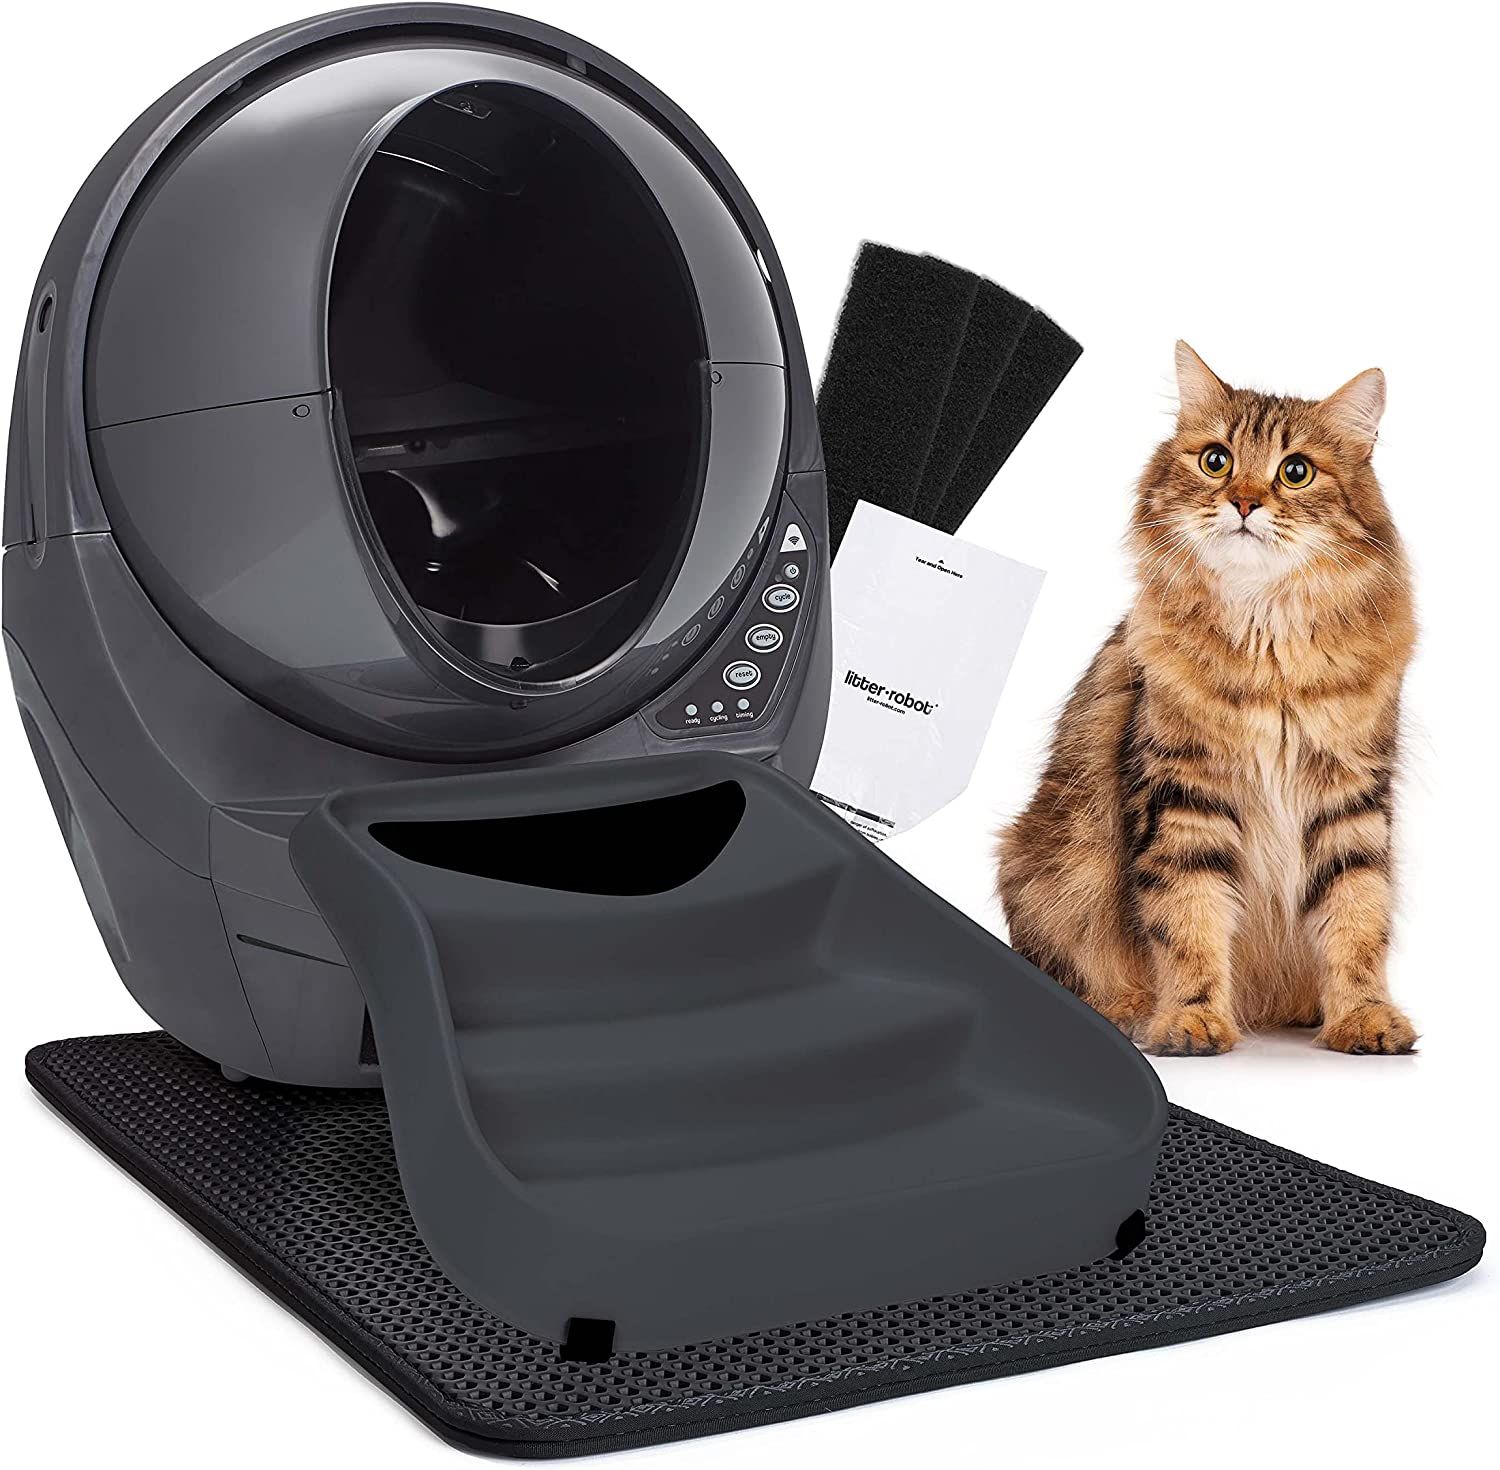 The Best SelfCleaning Litter Boxes